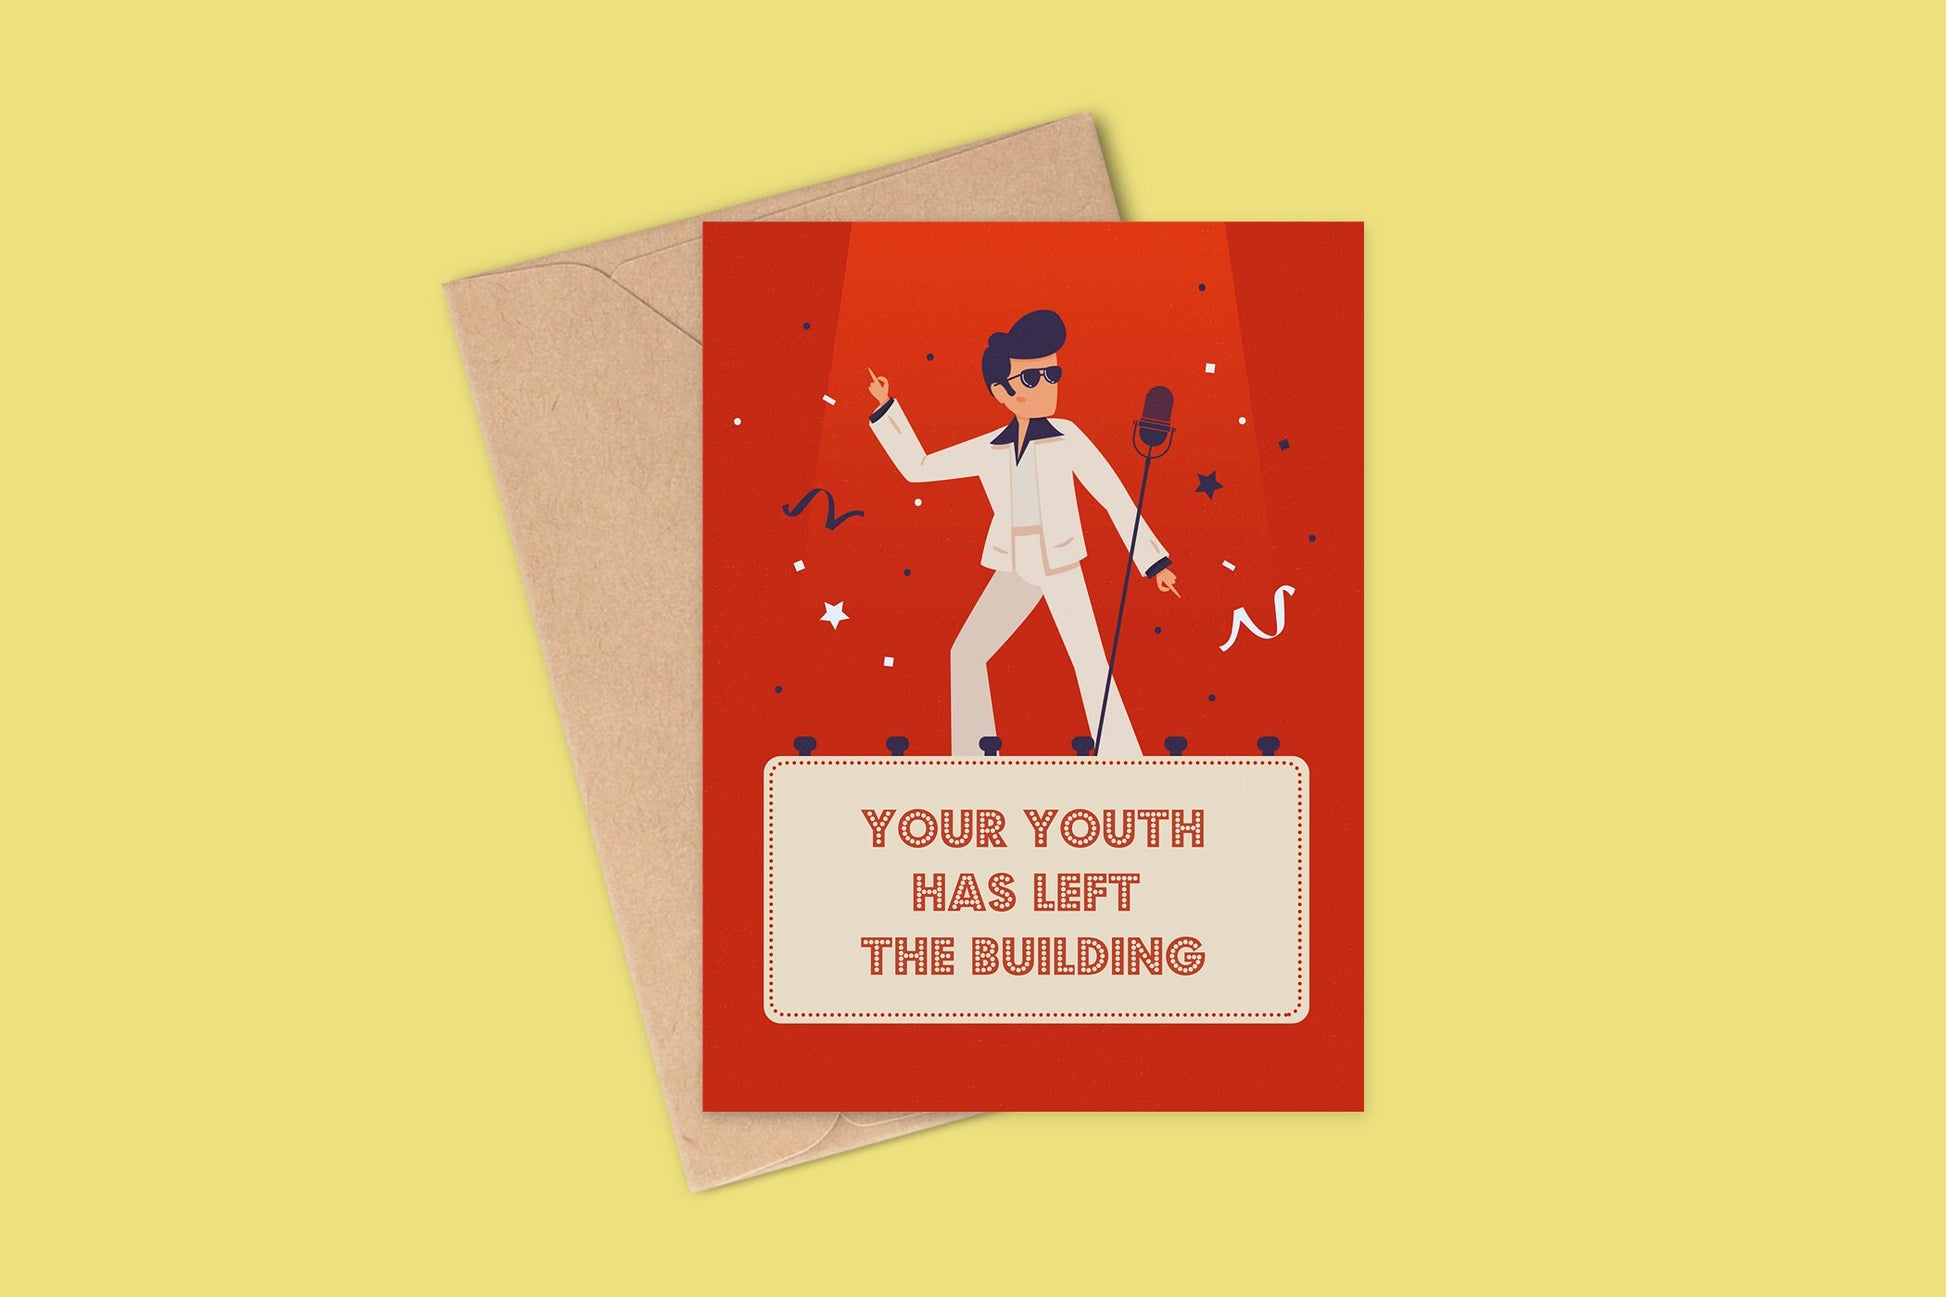 Funny Birthday Card For Him or Her, Elvis Presley, Funny Card, Birthday card, Funny Birthday Cards, Elvis Cards, Card For Music Lover